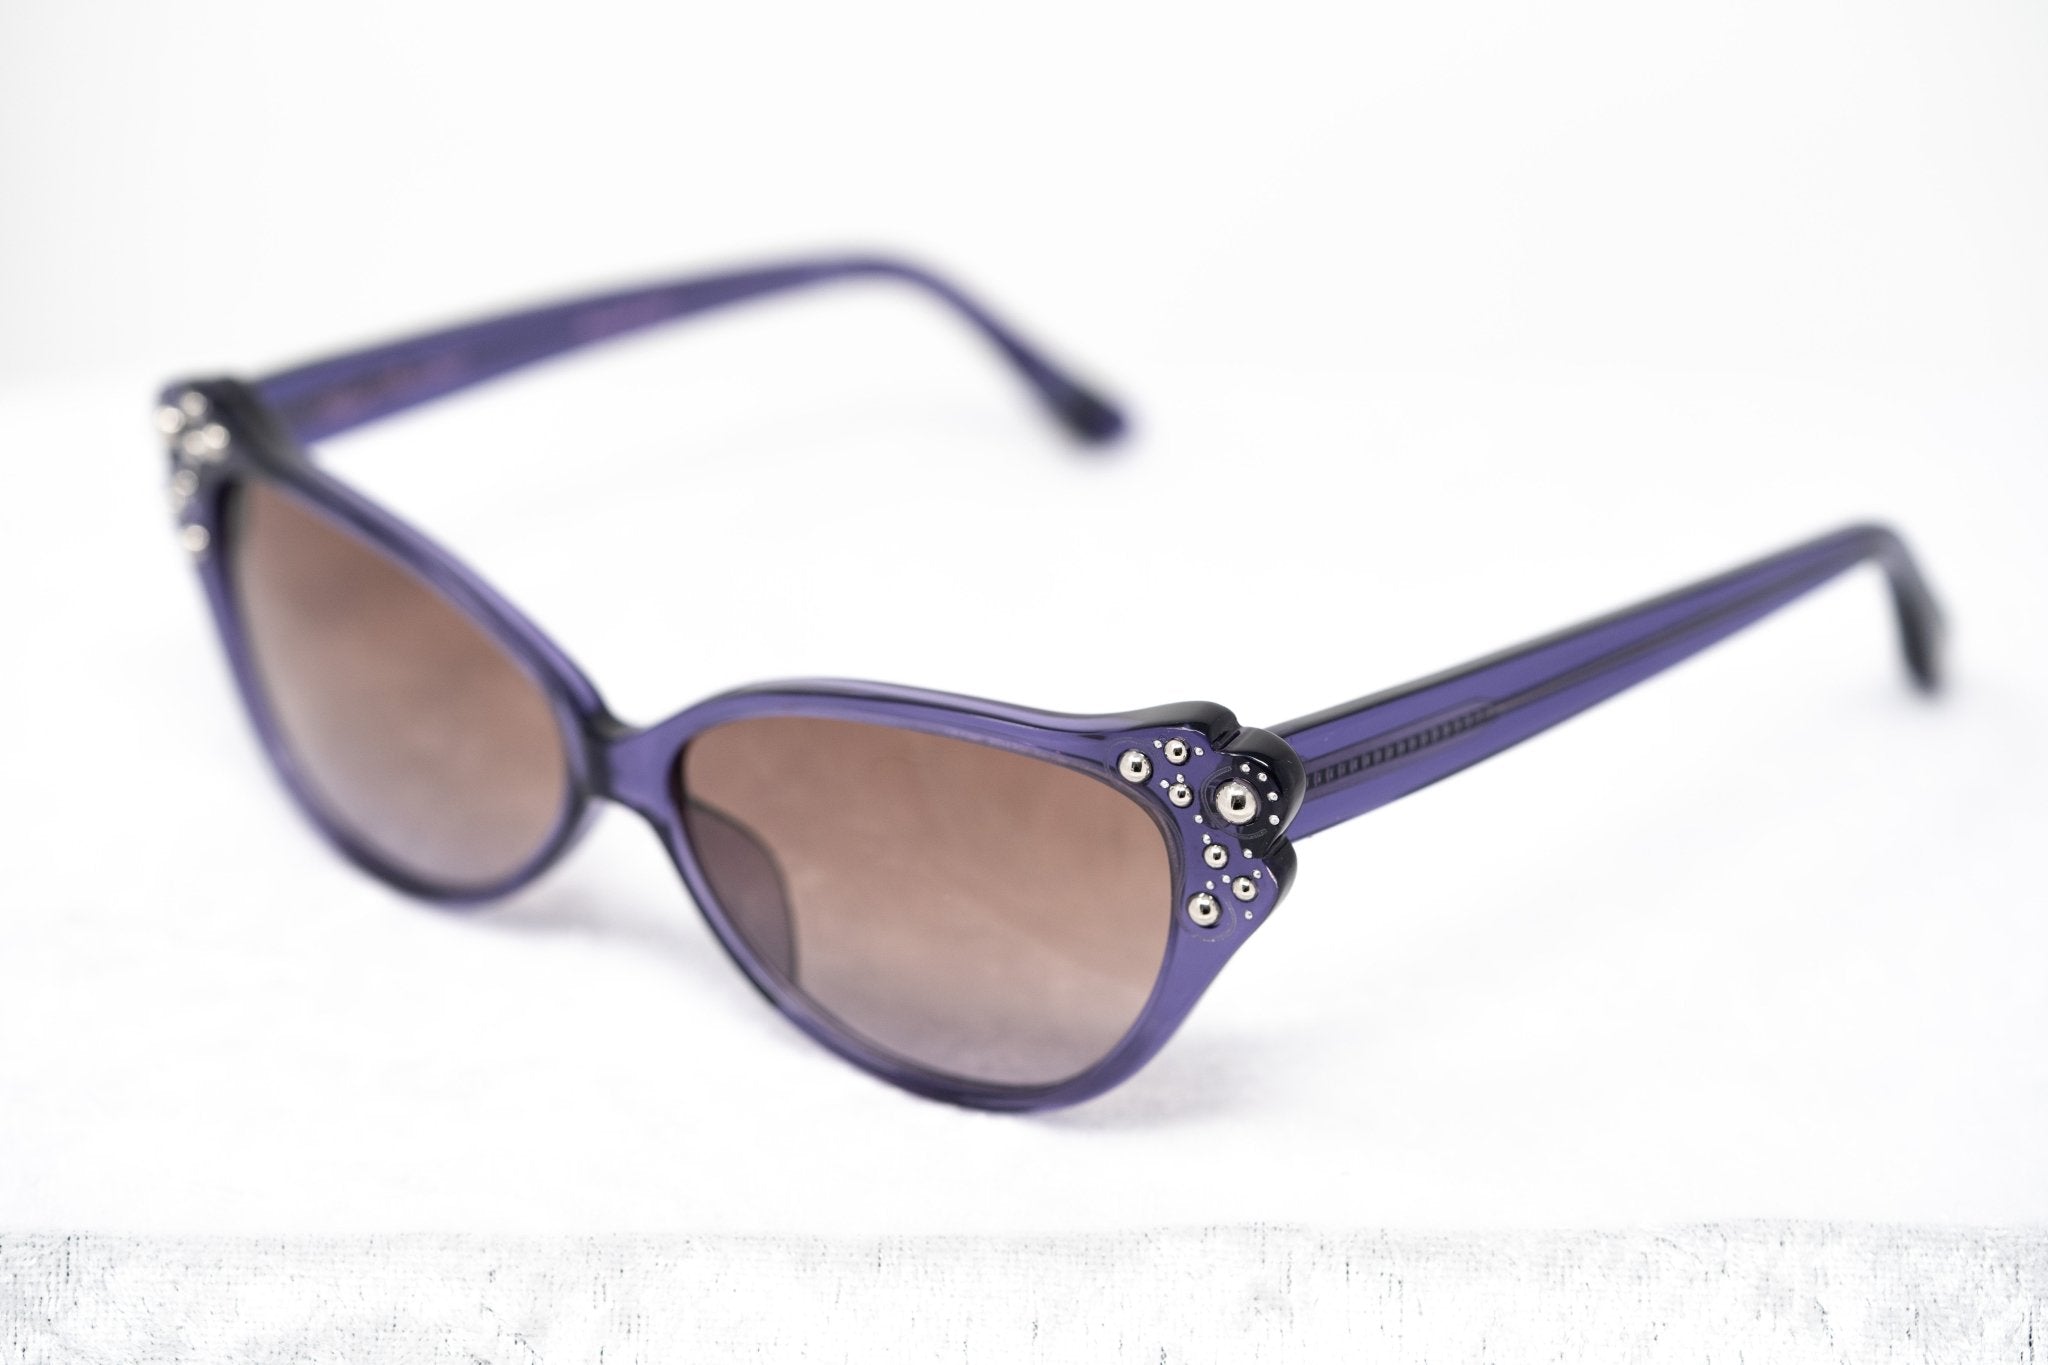 Agent Provocateur Sunglasses Cat Eye Purple and Brown Lenses - AP55C11OPT - Watches & Crystals